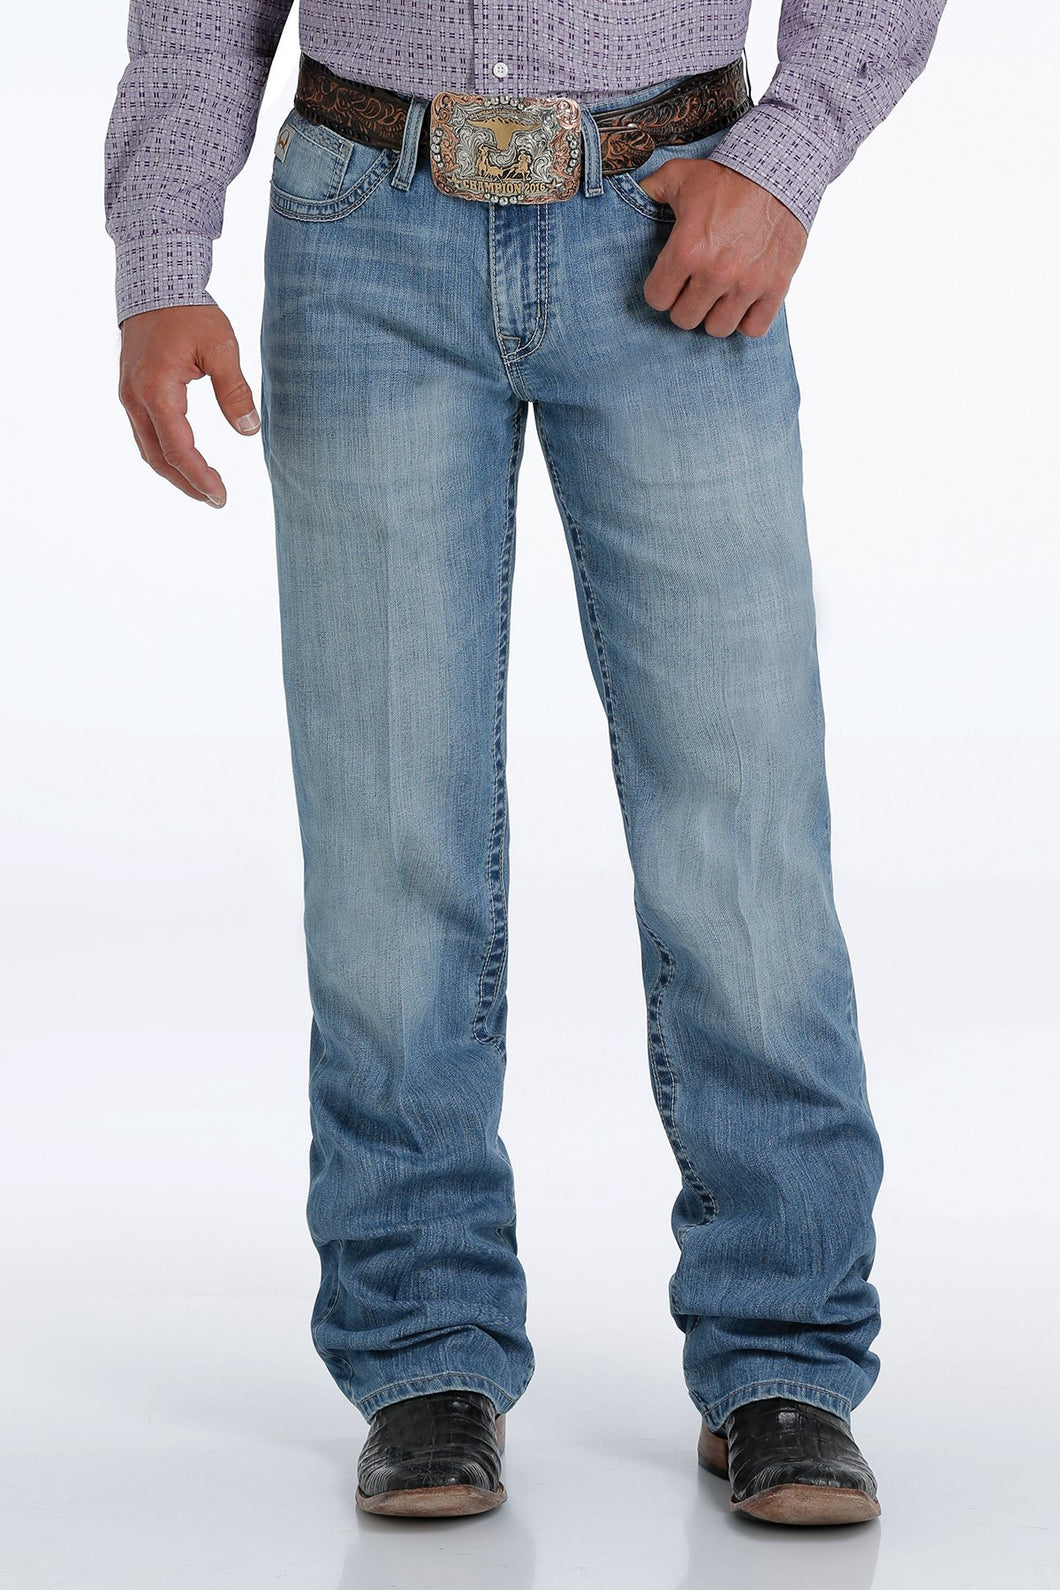 Cinch Grant Relaxed Fit Men's Jean